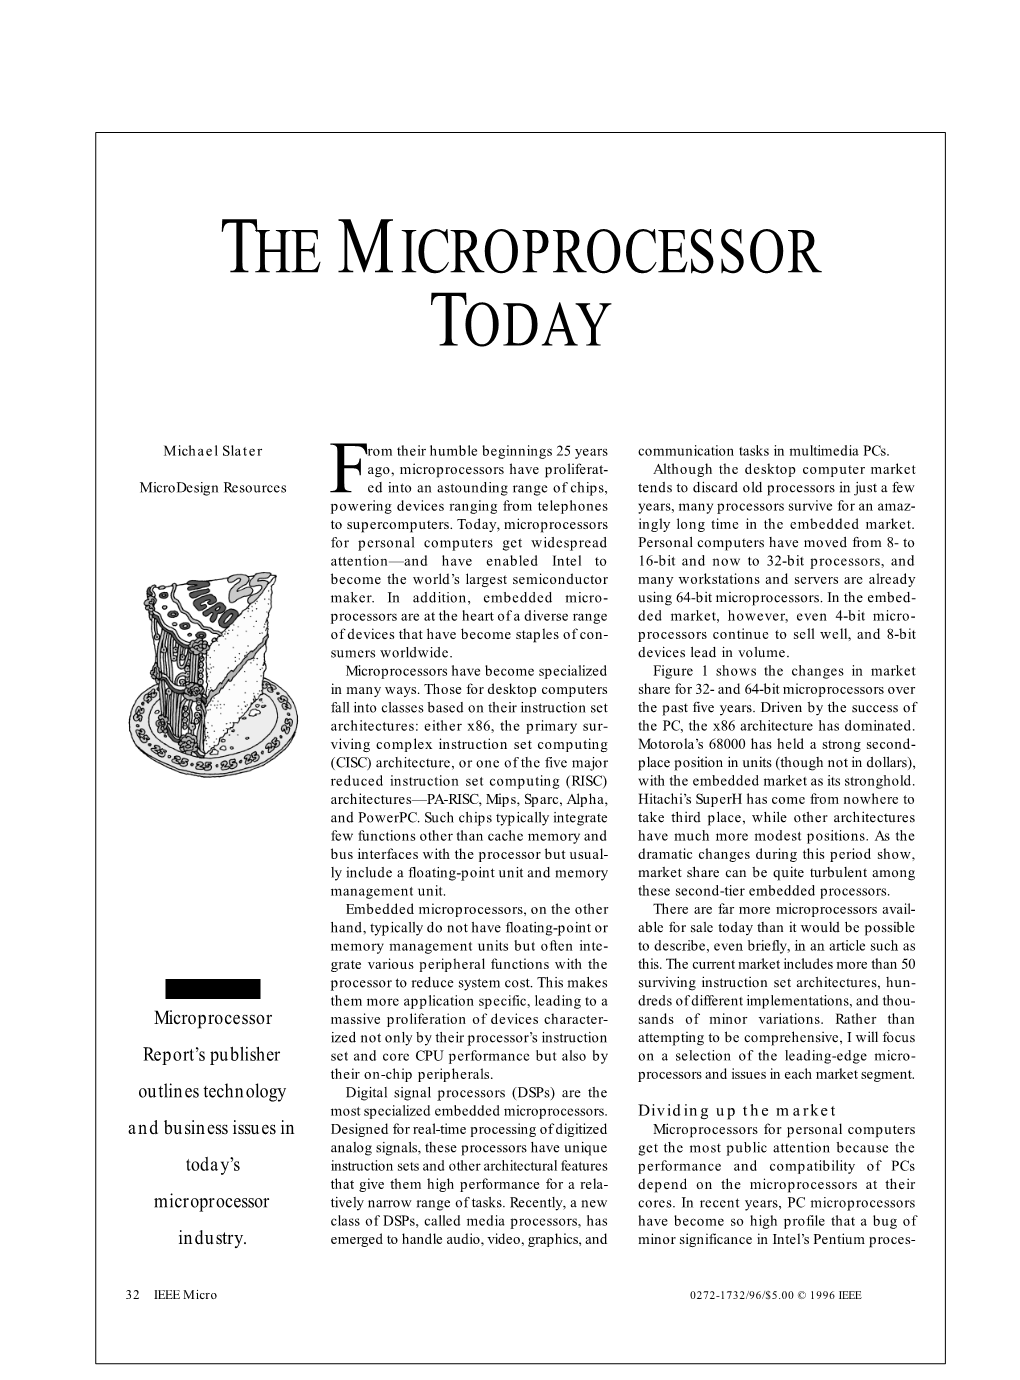 The Microprocessor Today